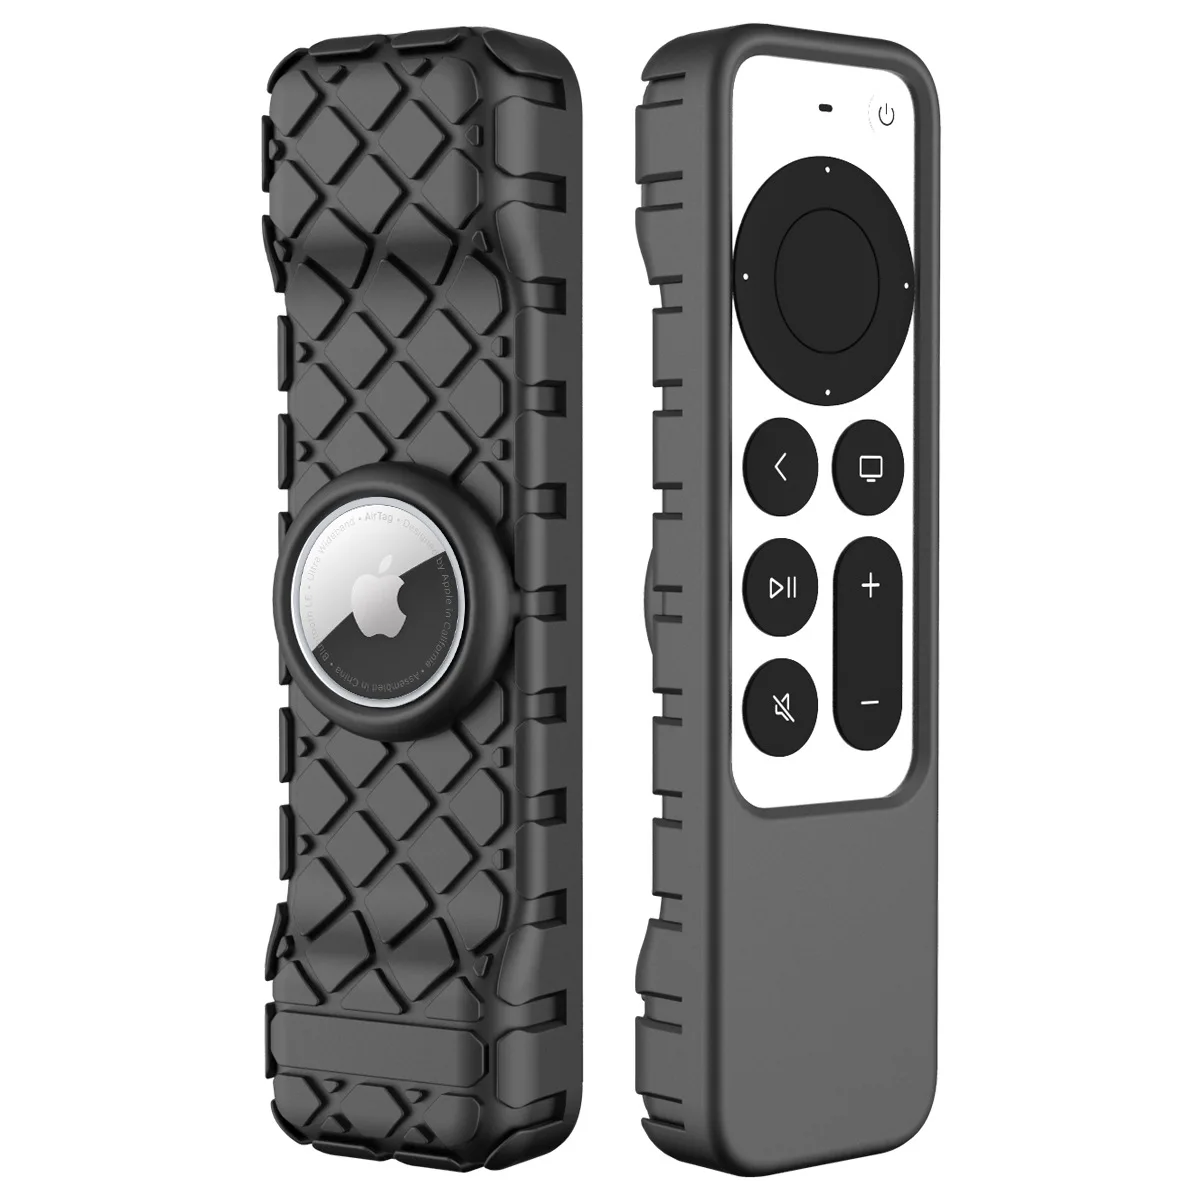 

For Apple Smart TV 4K Siri 2021 Remote Control Silicone Protective Cover Case, As picture shows